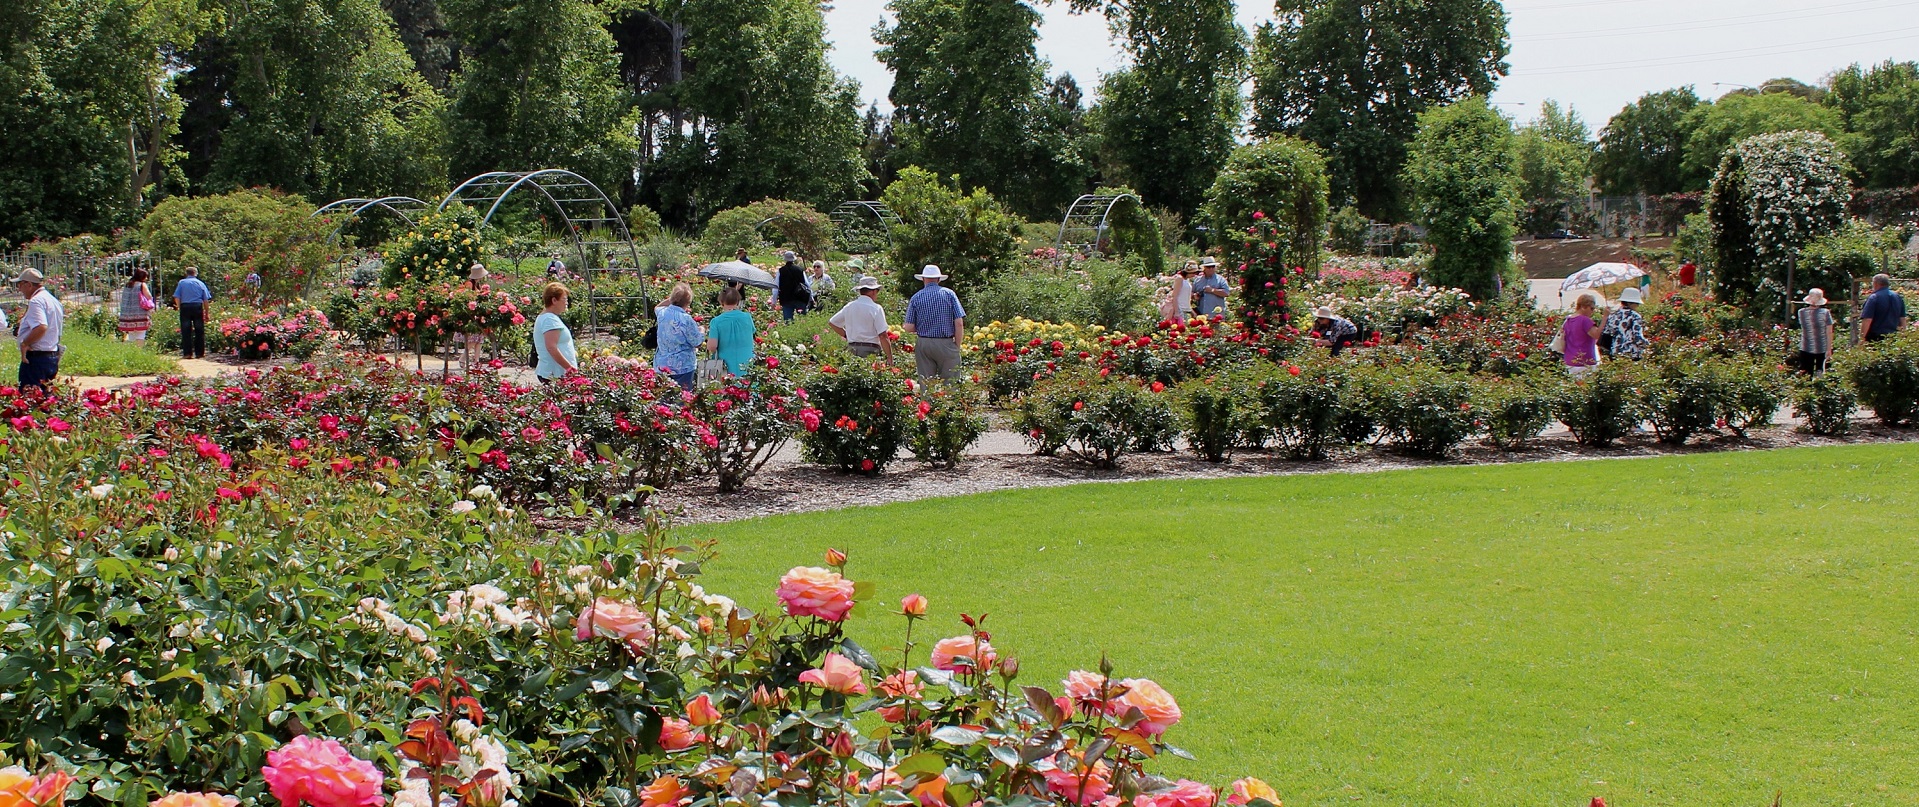 Global rose and garden event attracts international visitors To...